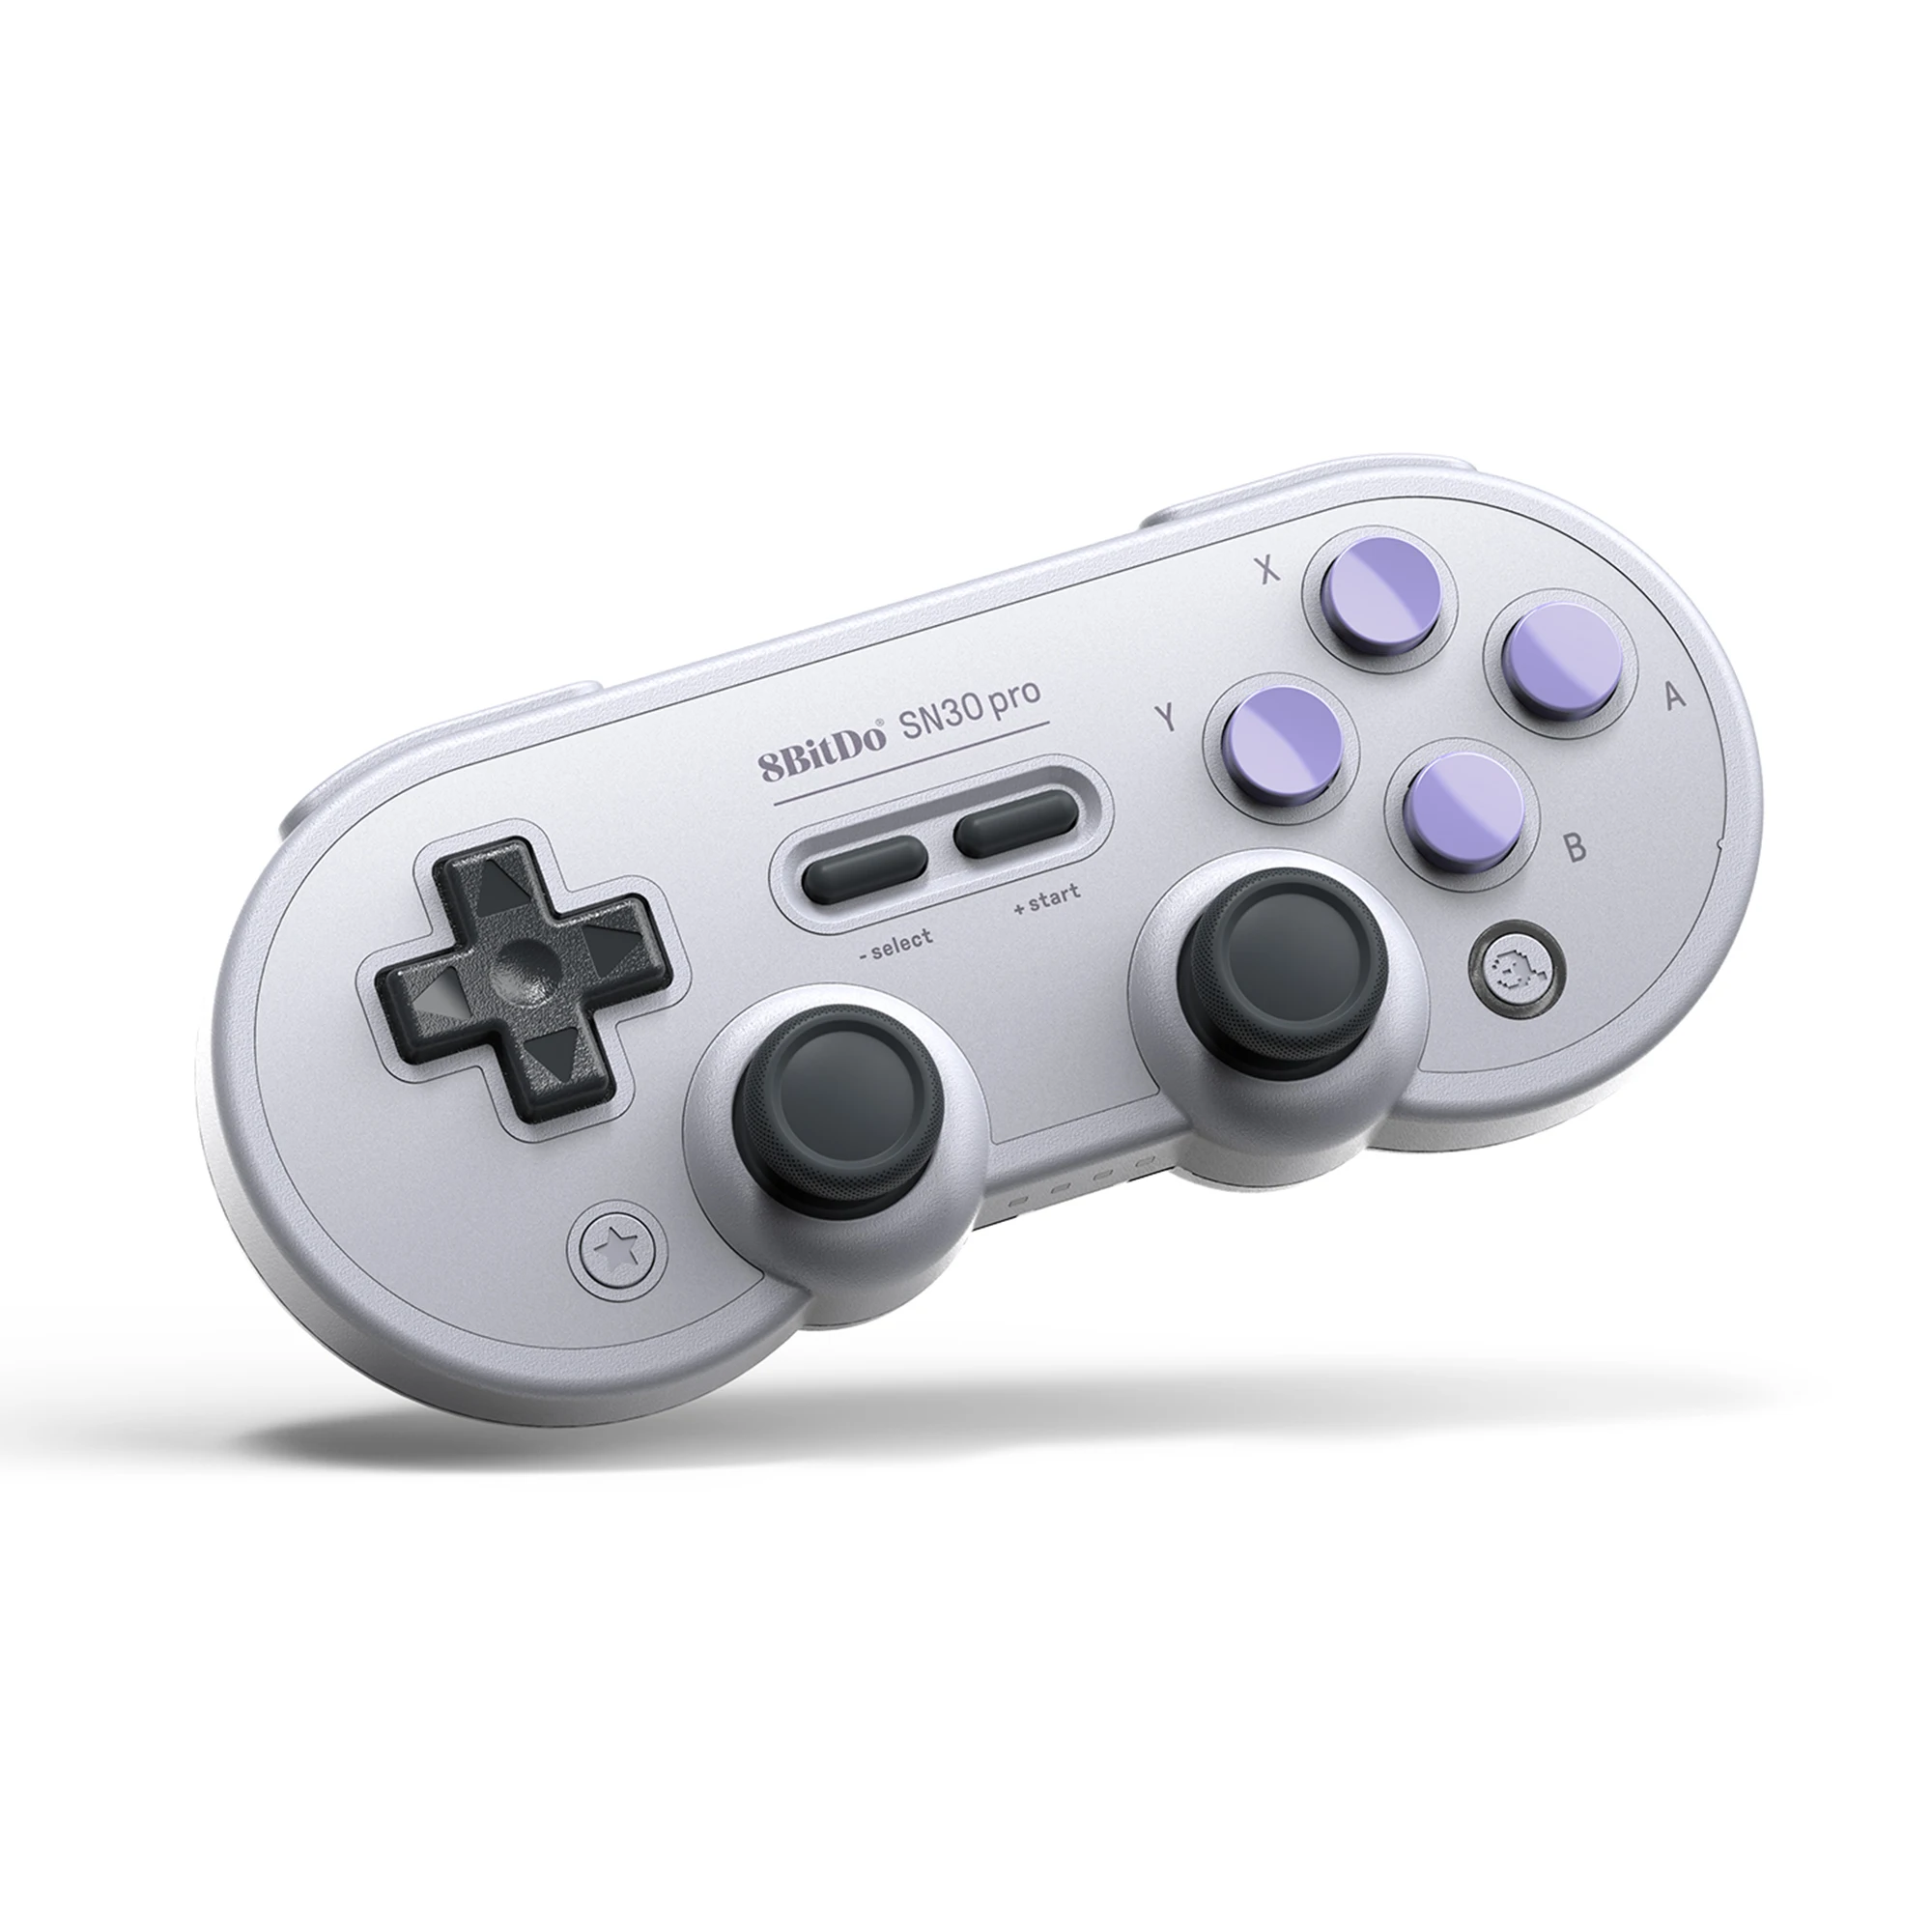 Amazon Hot Sale 8bitdo Sn30pro Gb Retro For Ios And Android Gamepad Joystick Android Ios Purple Buy Joystick Gamepad Game Controller Product On Alibaba Com